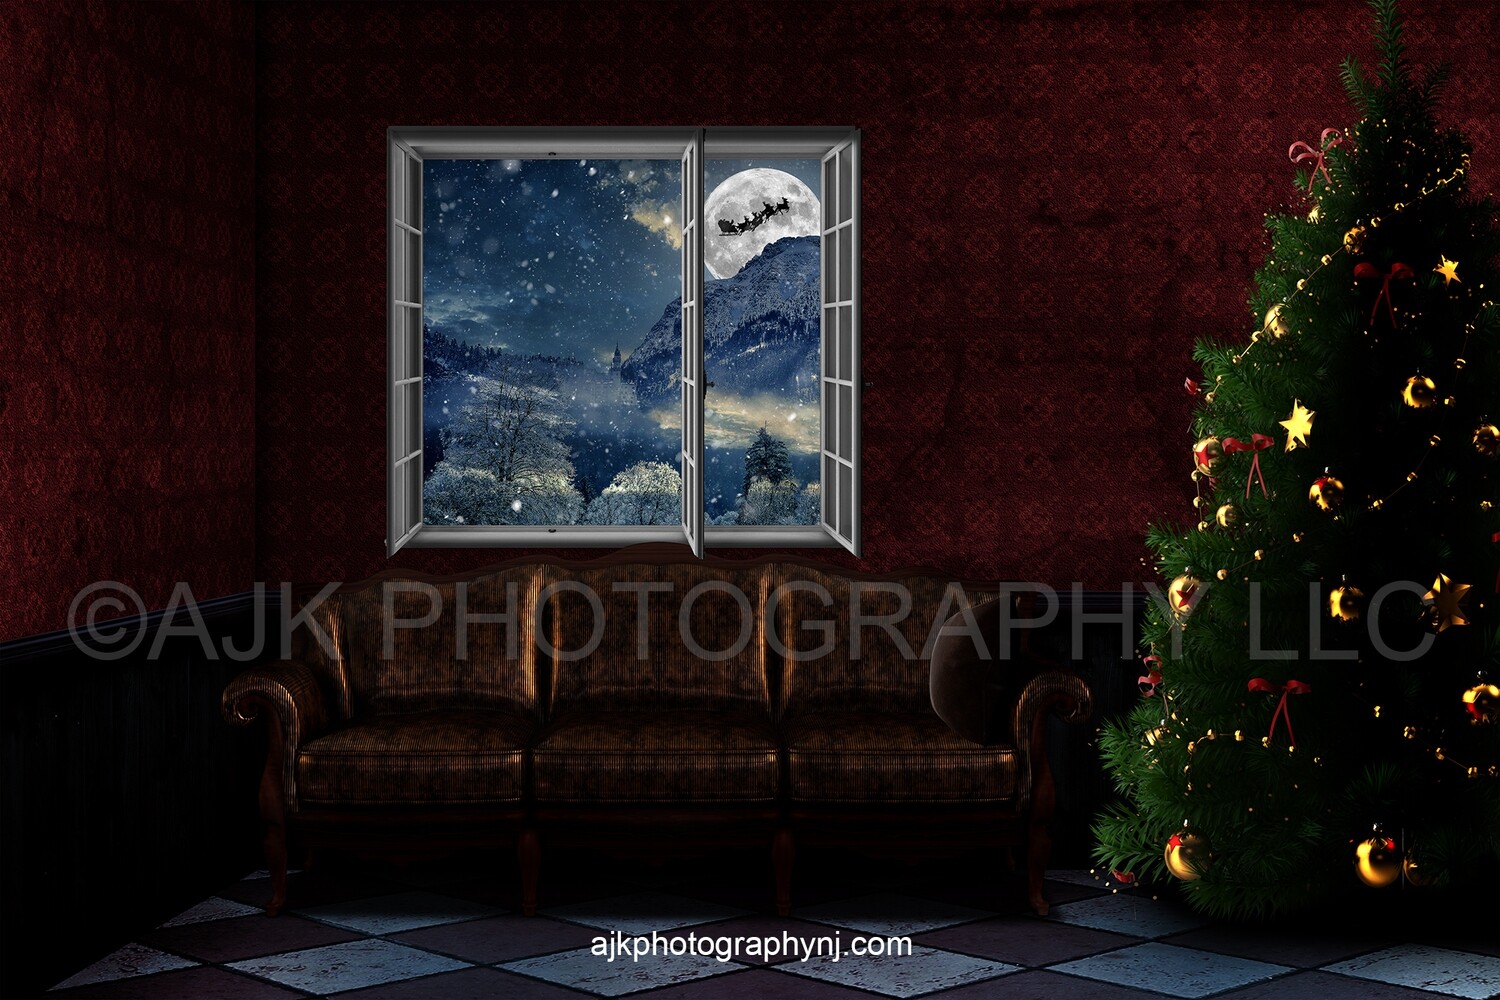 Santa Claus flying in sleigh across large moon in front of a barn loft decorated for Christmas digital backdrop